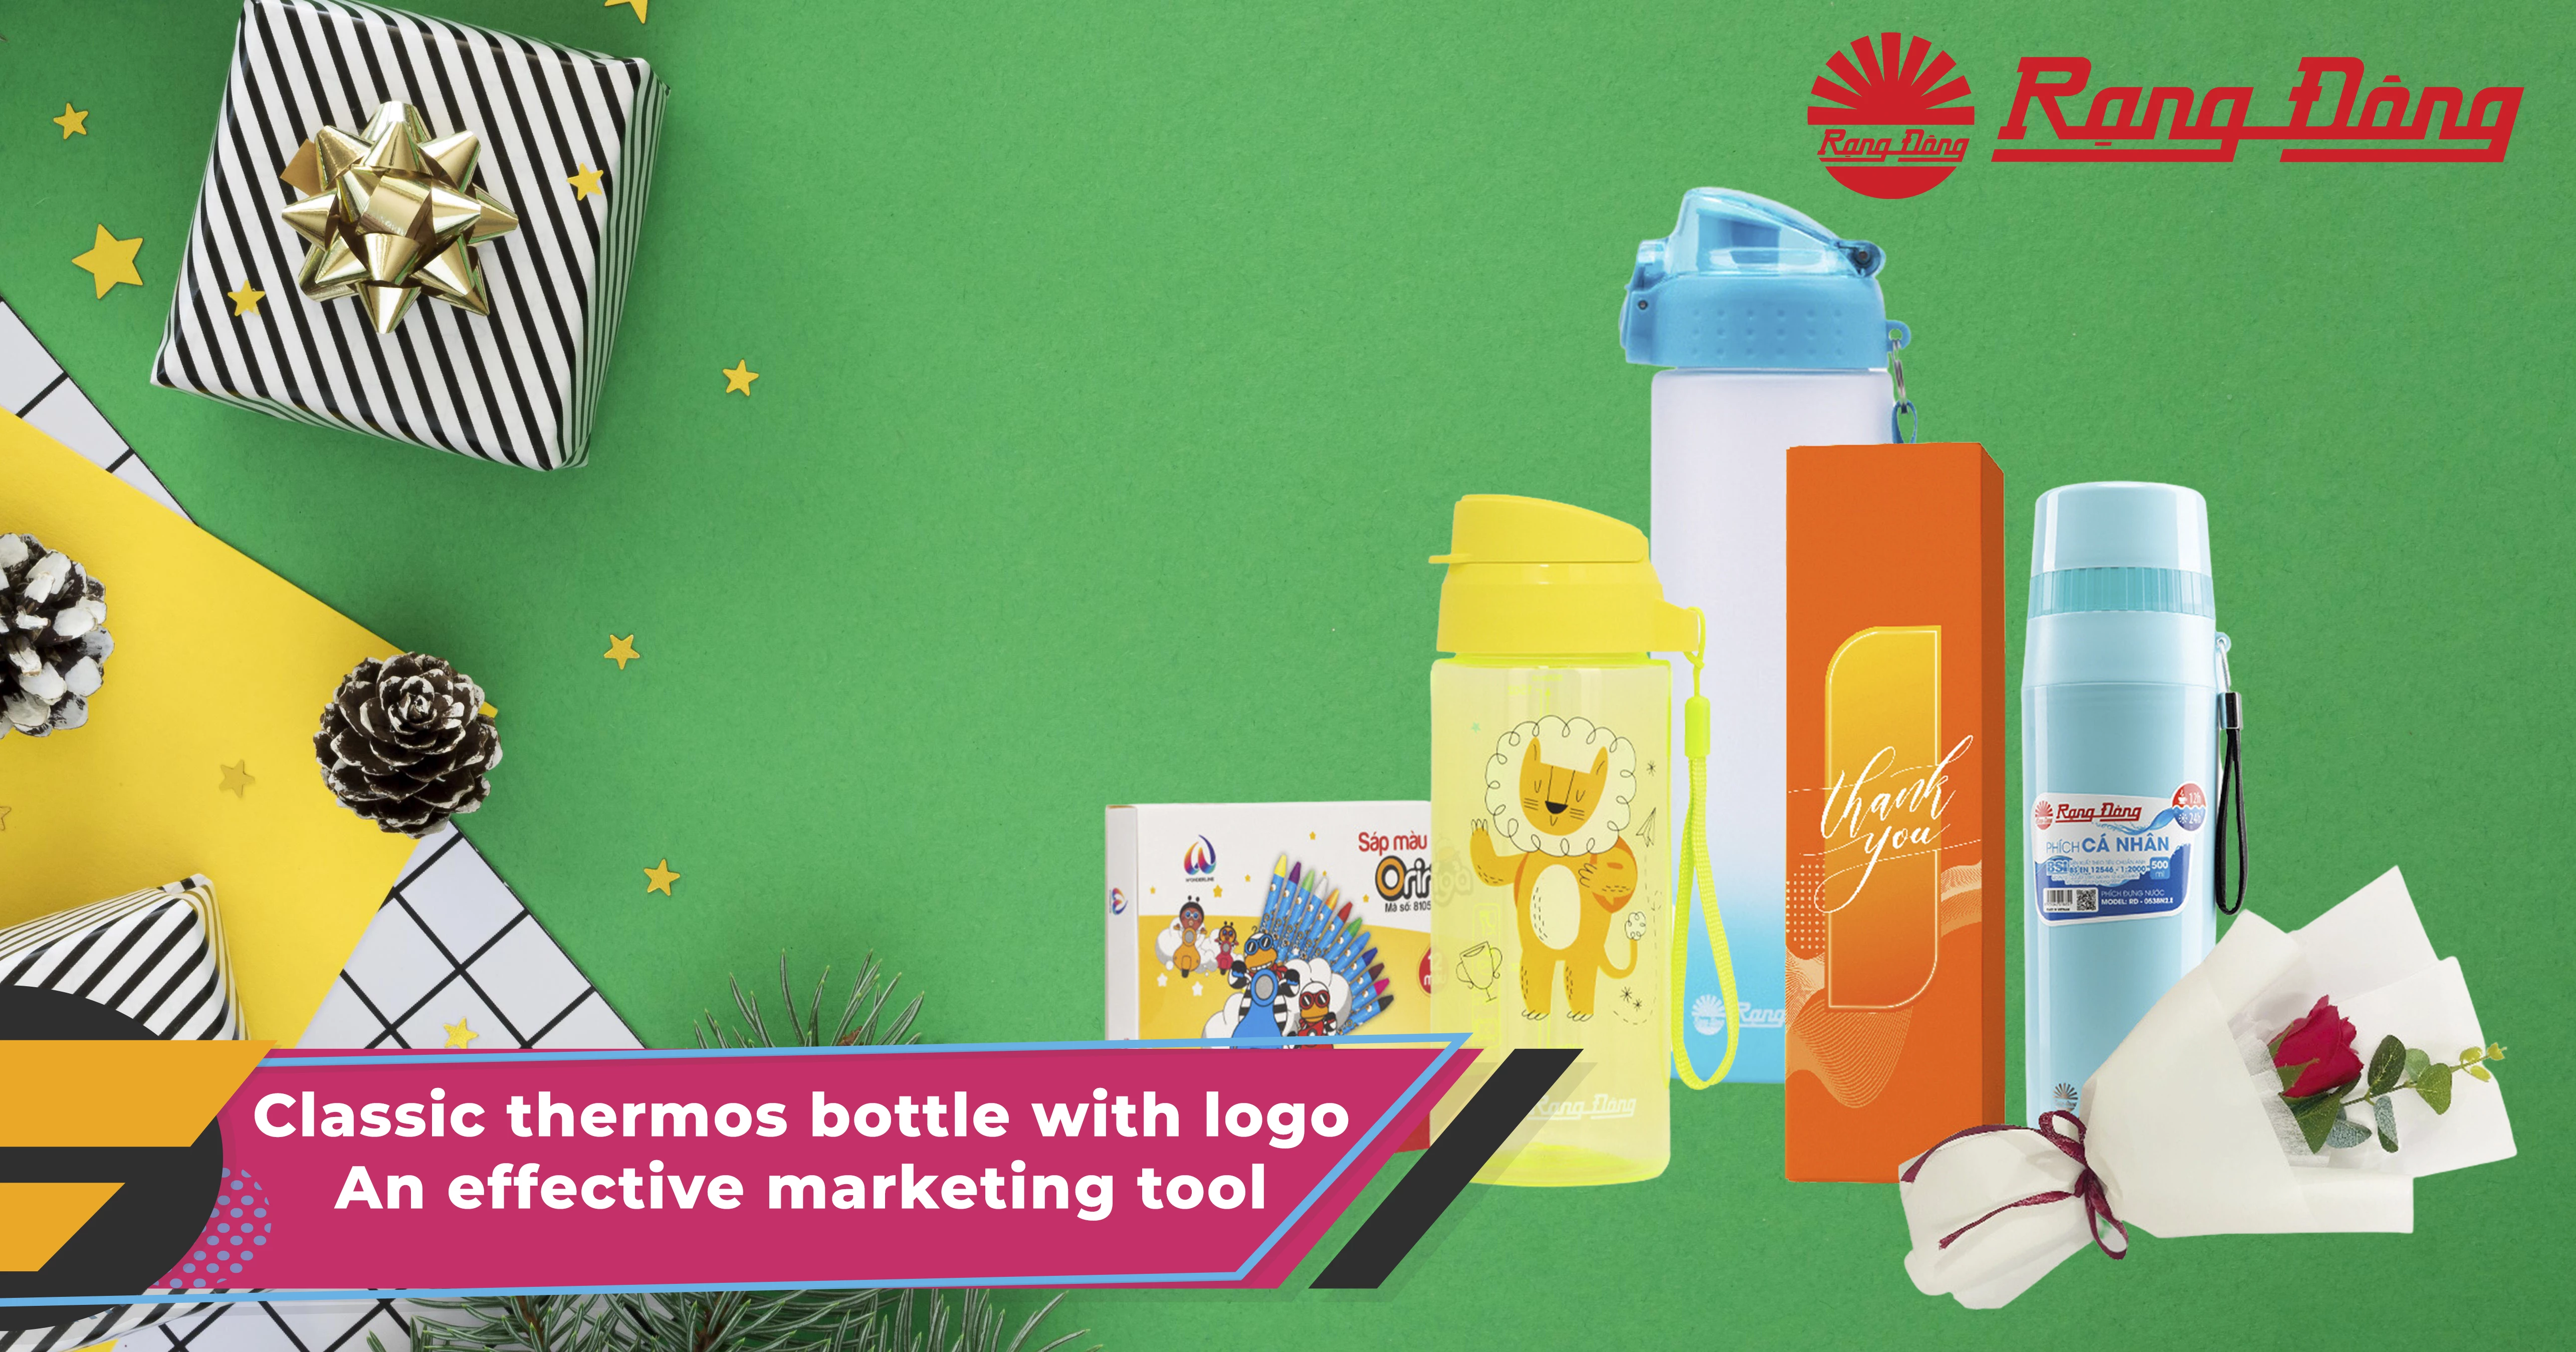 Classic thermos bottle with logo - An effective marketing tool